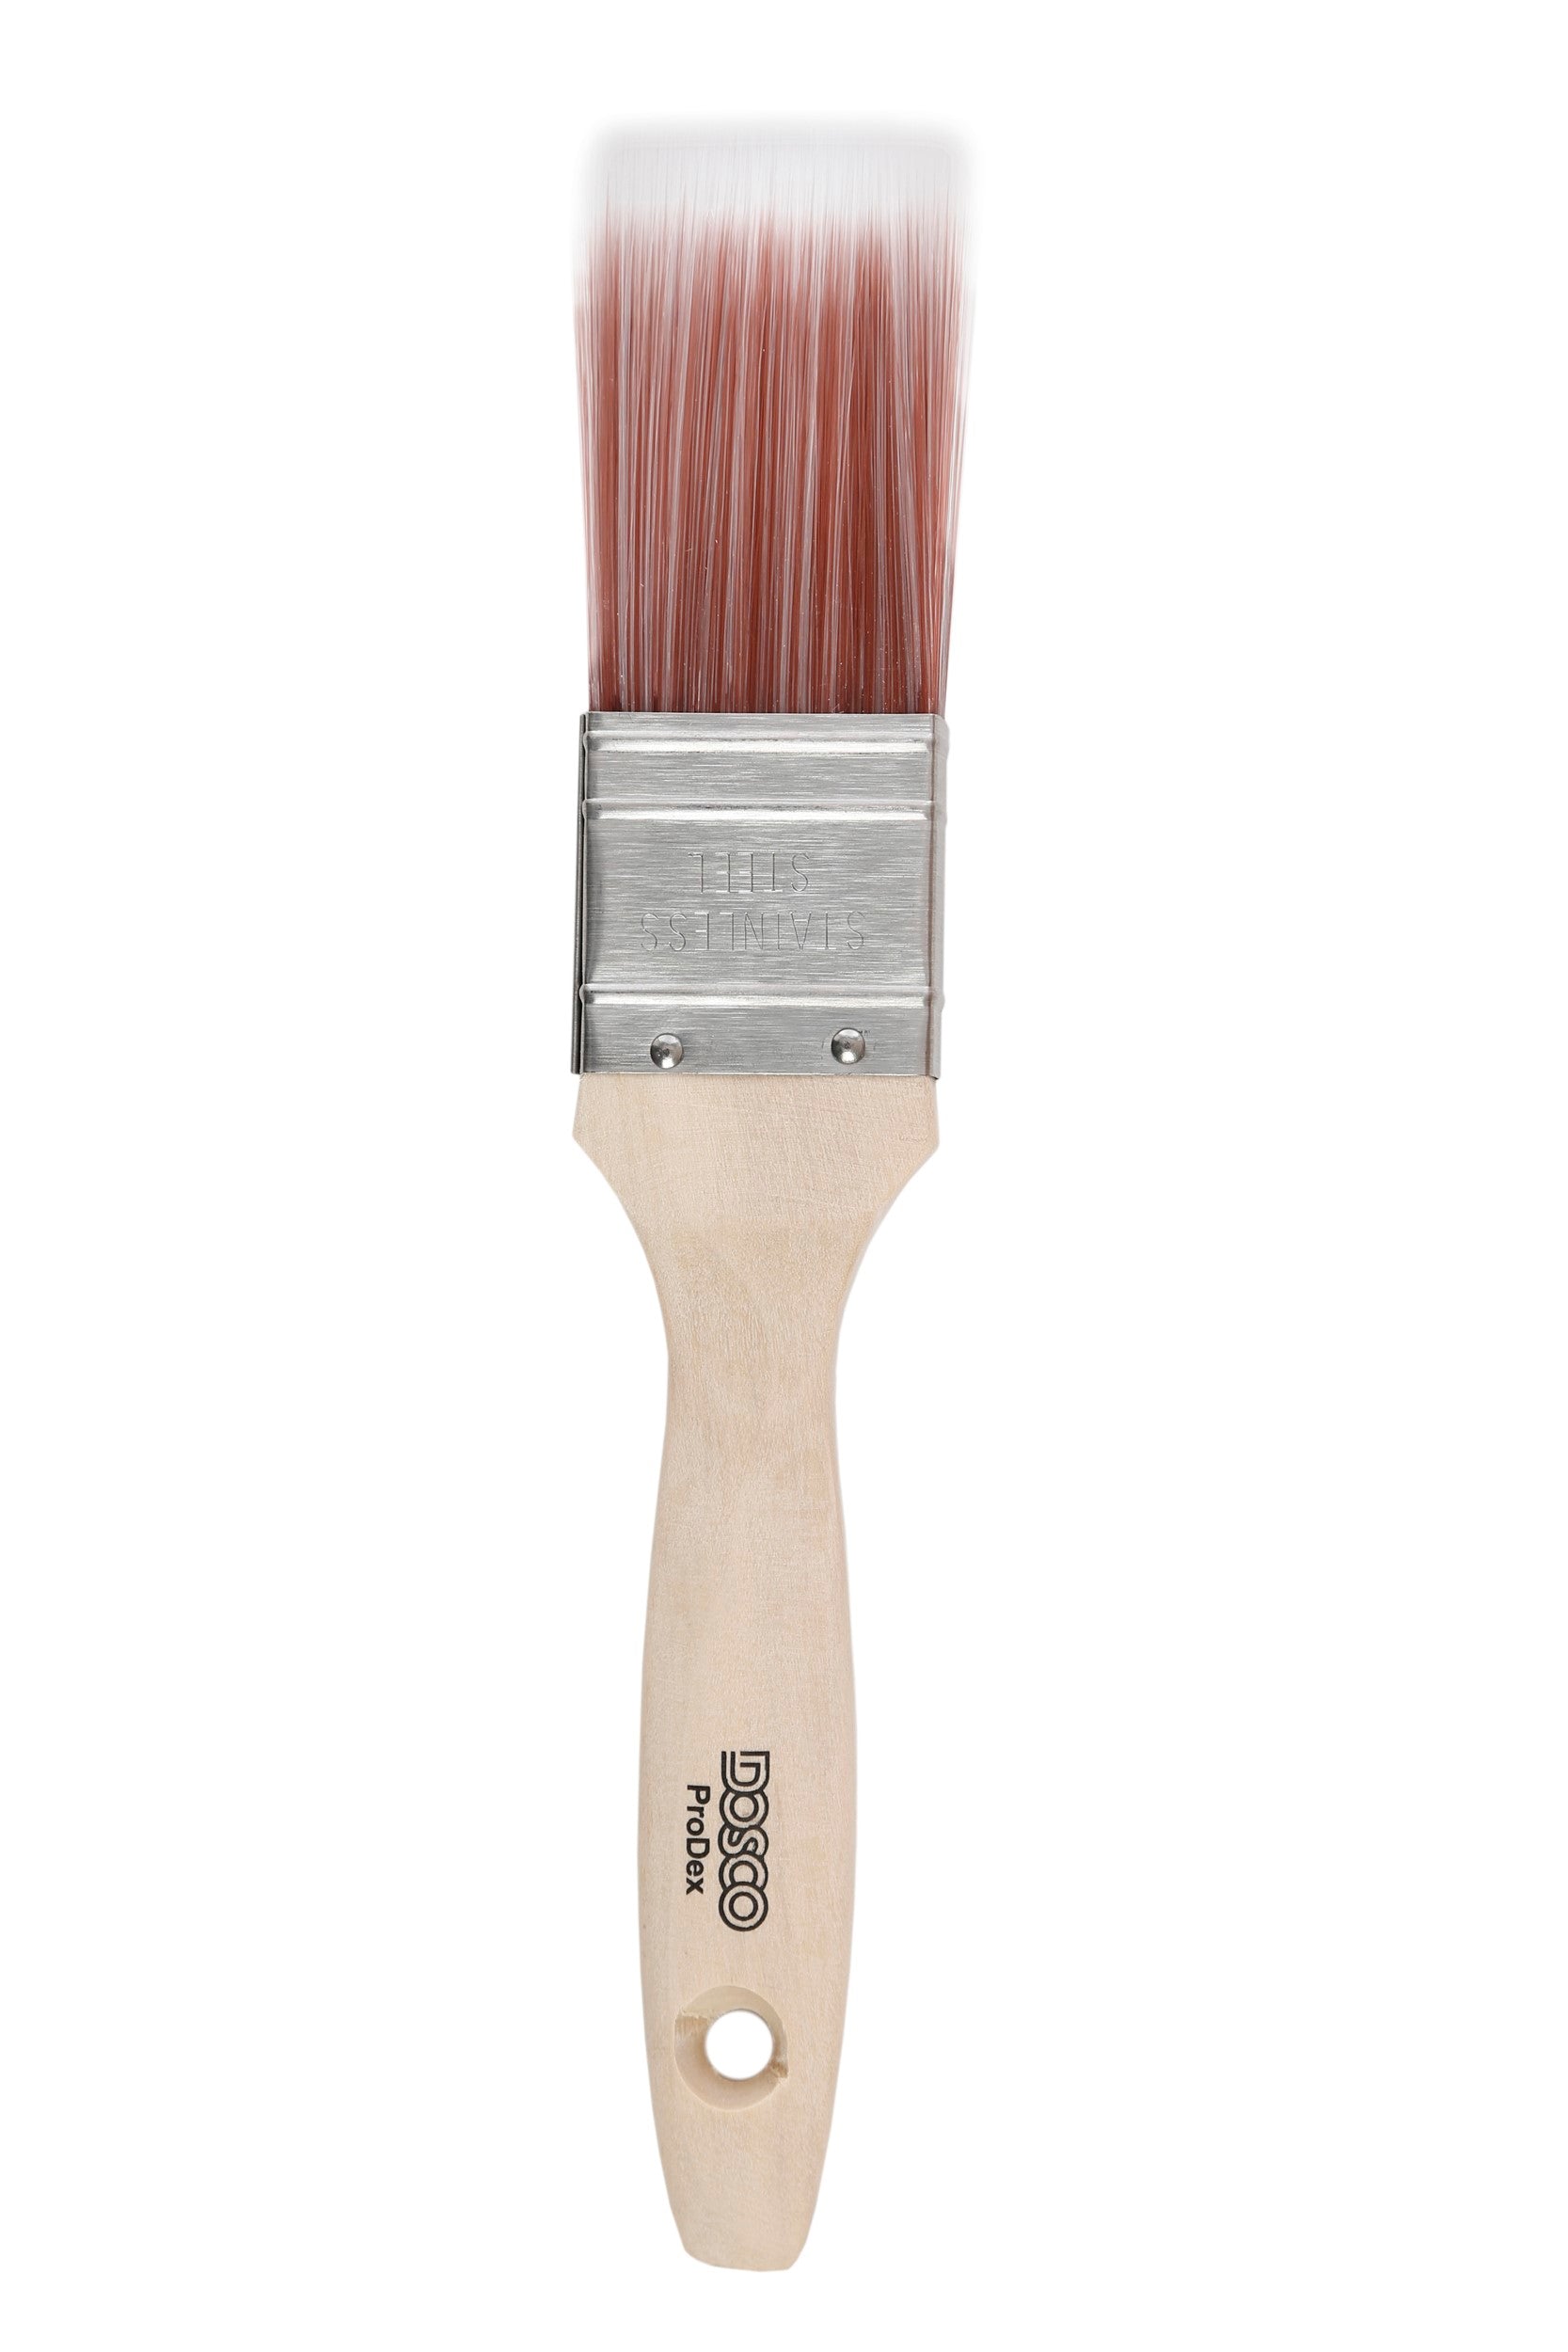 Paint & Decorating | DOSCO Pro-Dex Synthetic Paint Brush 2 inch by Weirs of Baggot St